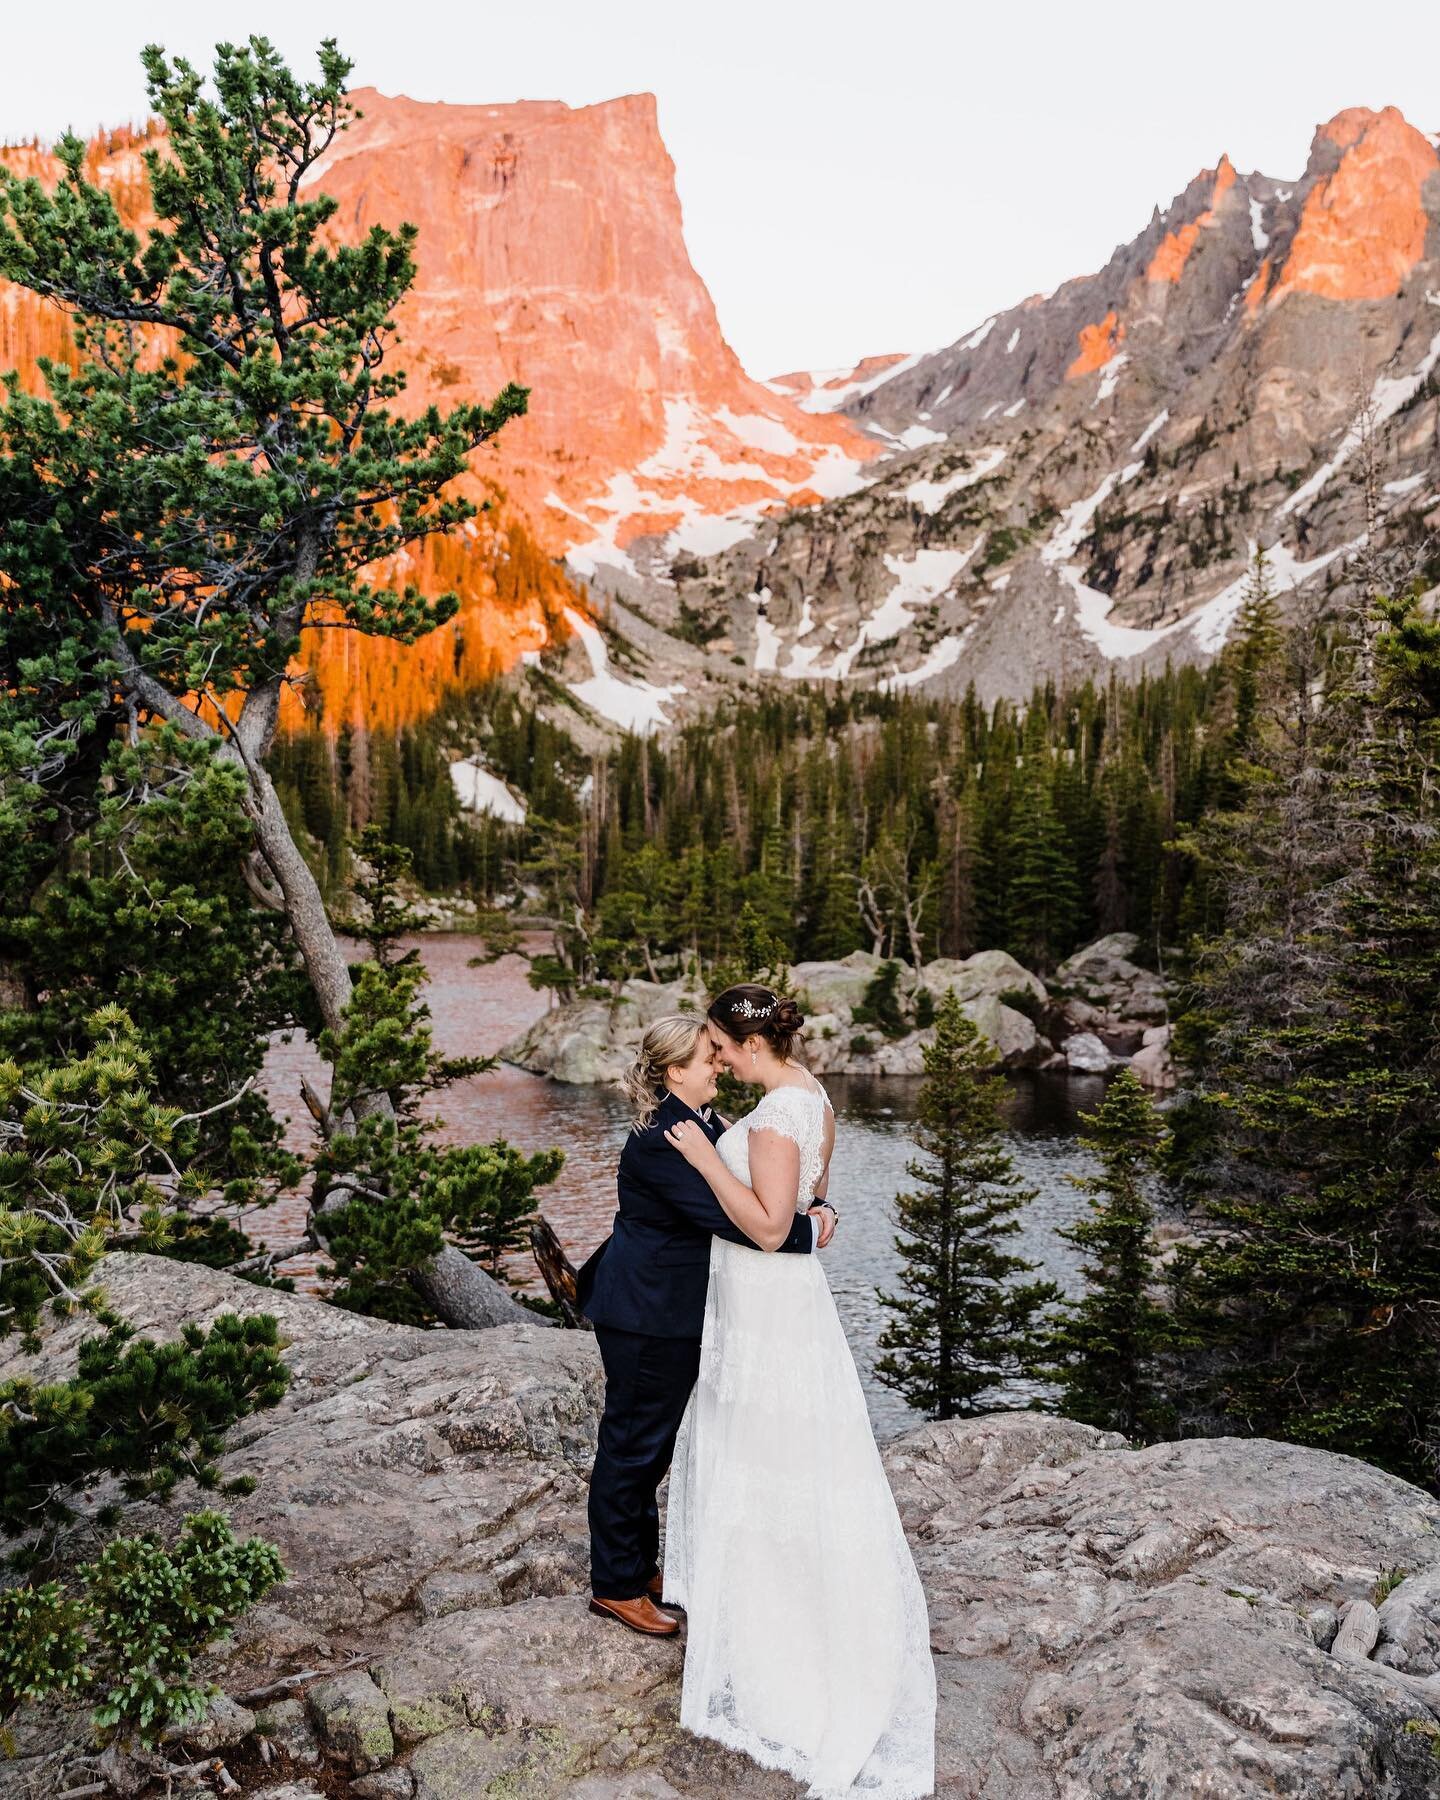 ✨Elopement Tip - How to Avoid Crowds✨

Often, our couples tell us that they dream of eloping in a beautiful location with no one around. And we have to be honest, as more and more people fall in love with the outdoors, this is getting more and more d